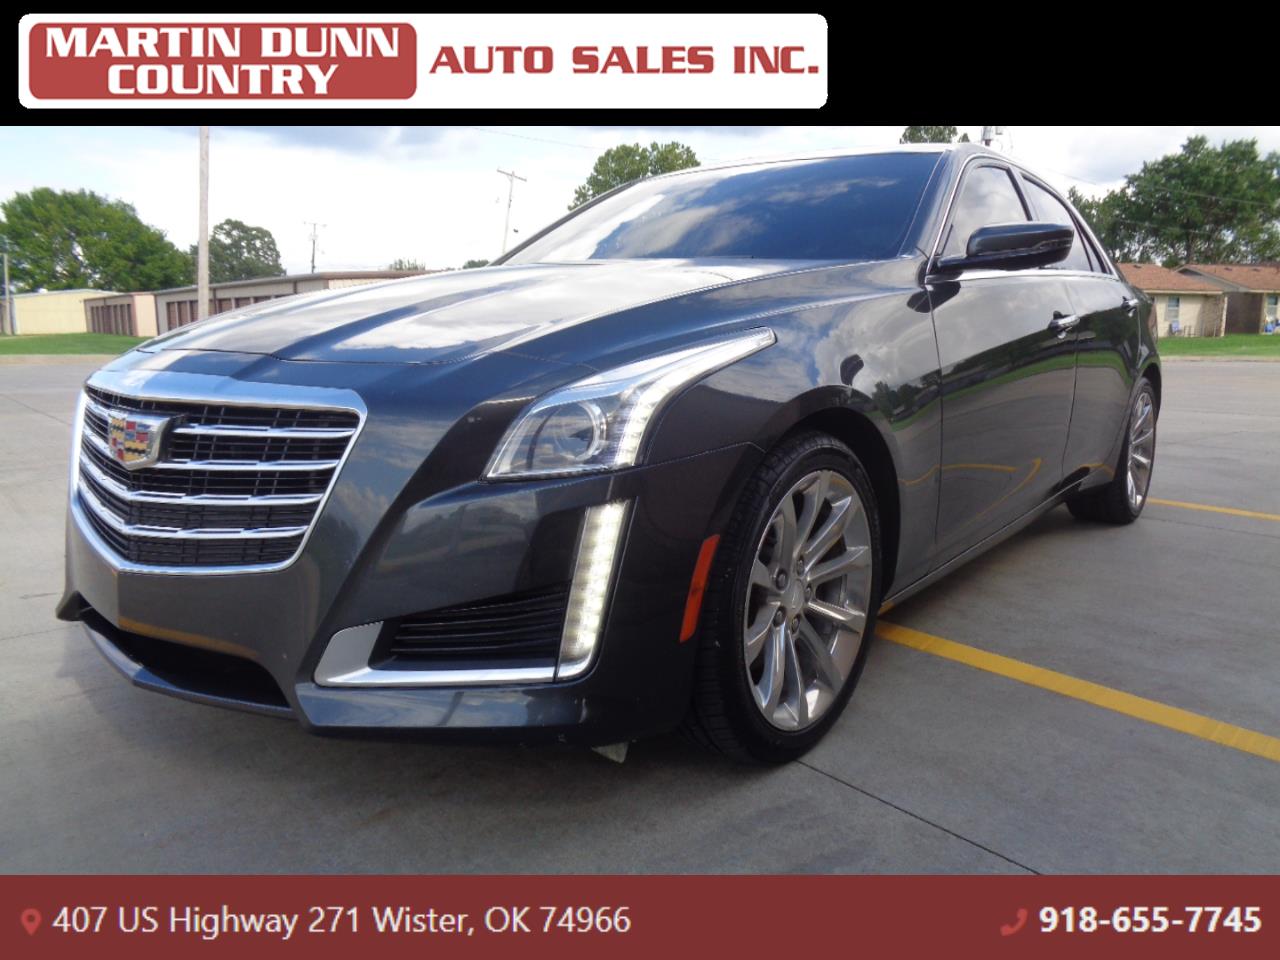 2017 Cadillac CTS Wister OK